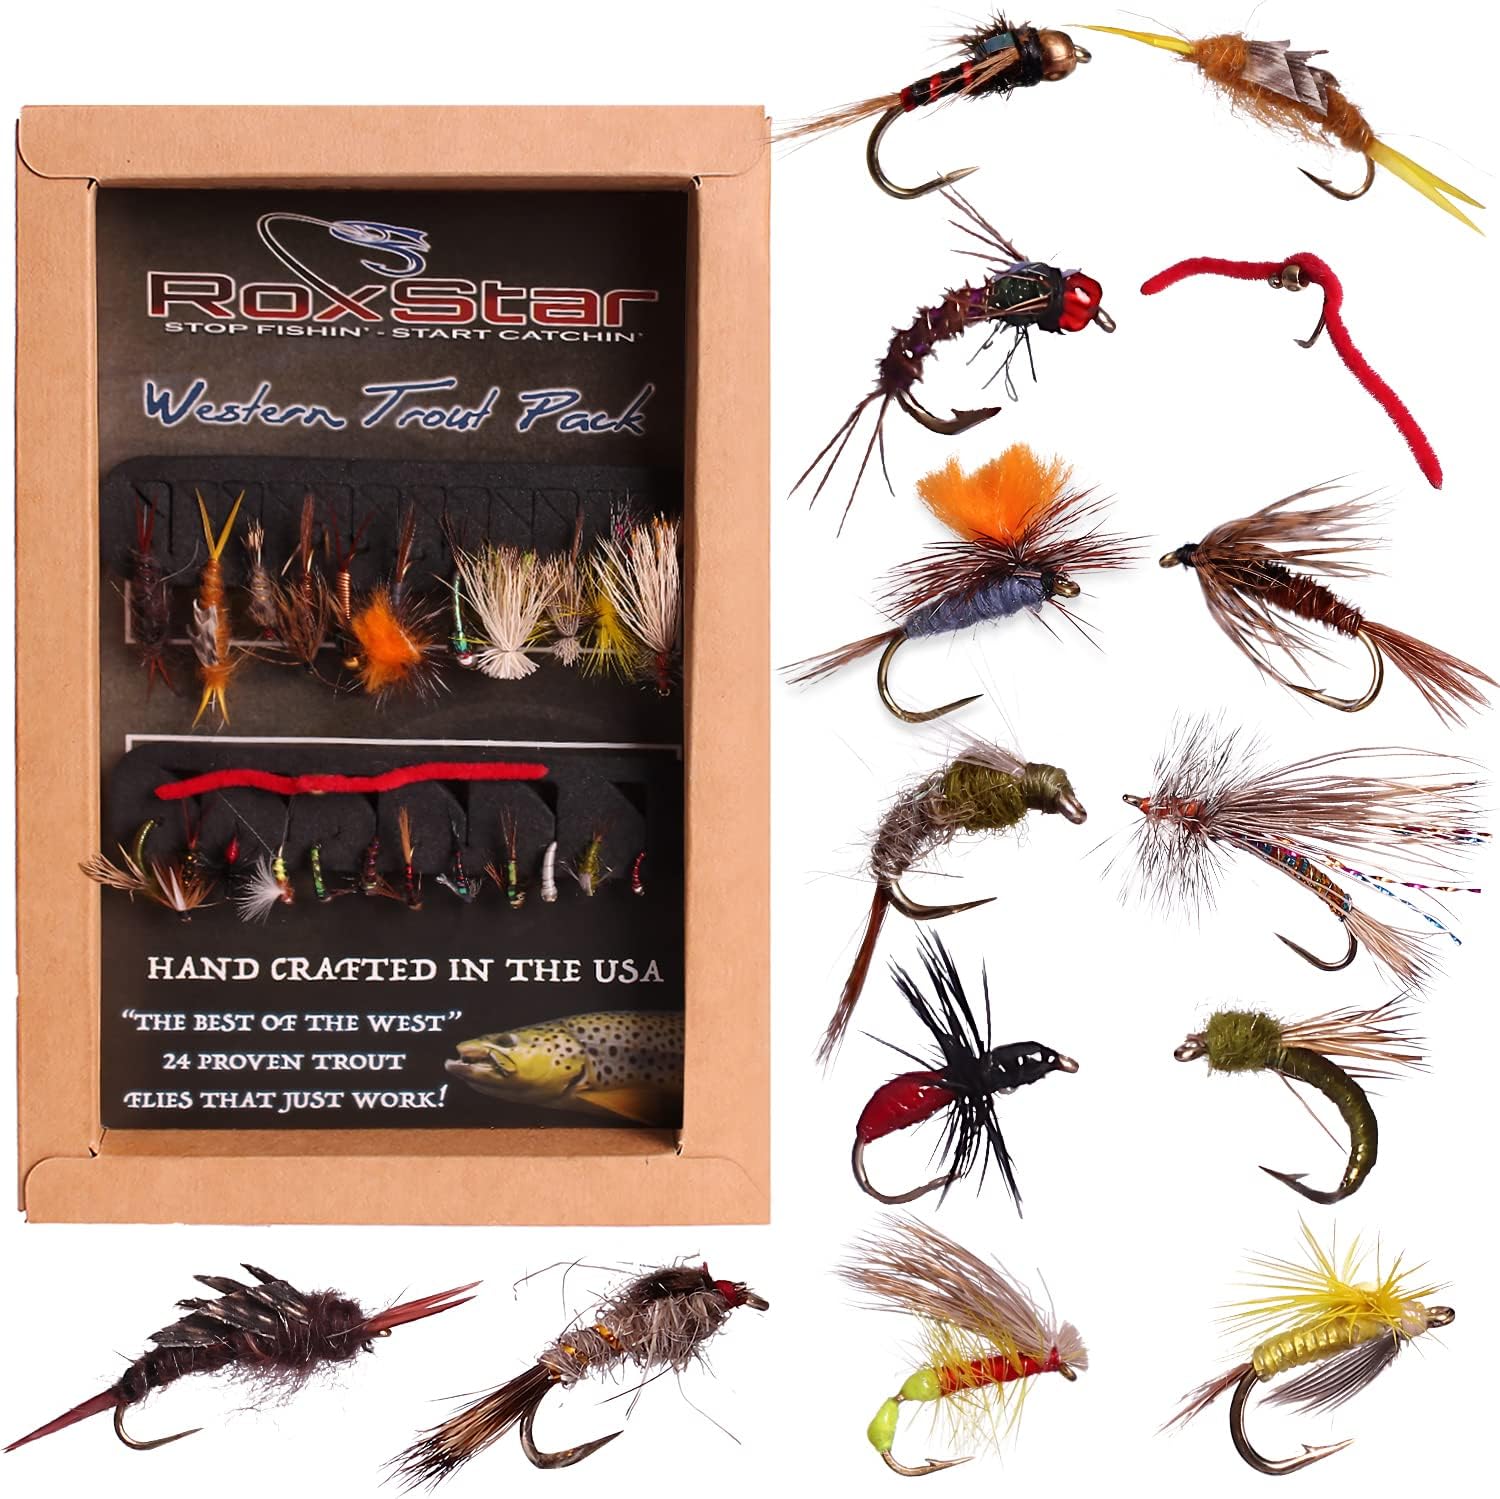 60PCS Fly Fishing Wet Dry Flies Assortment Kit for Trout Fishing